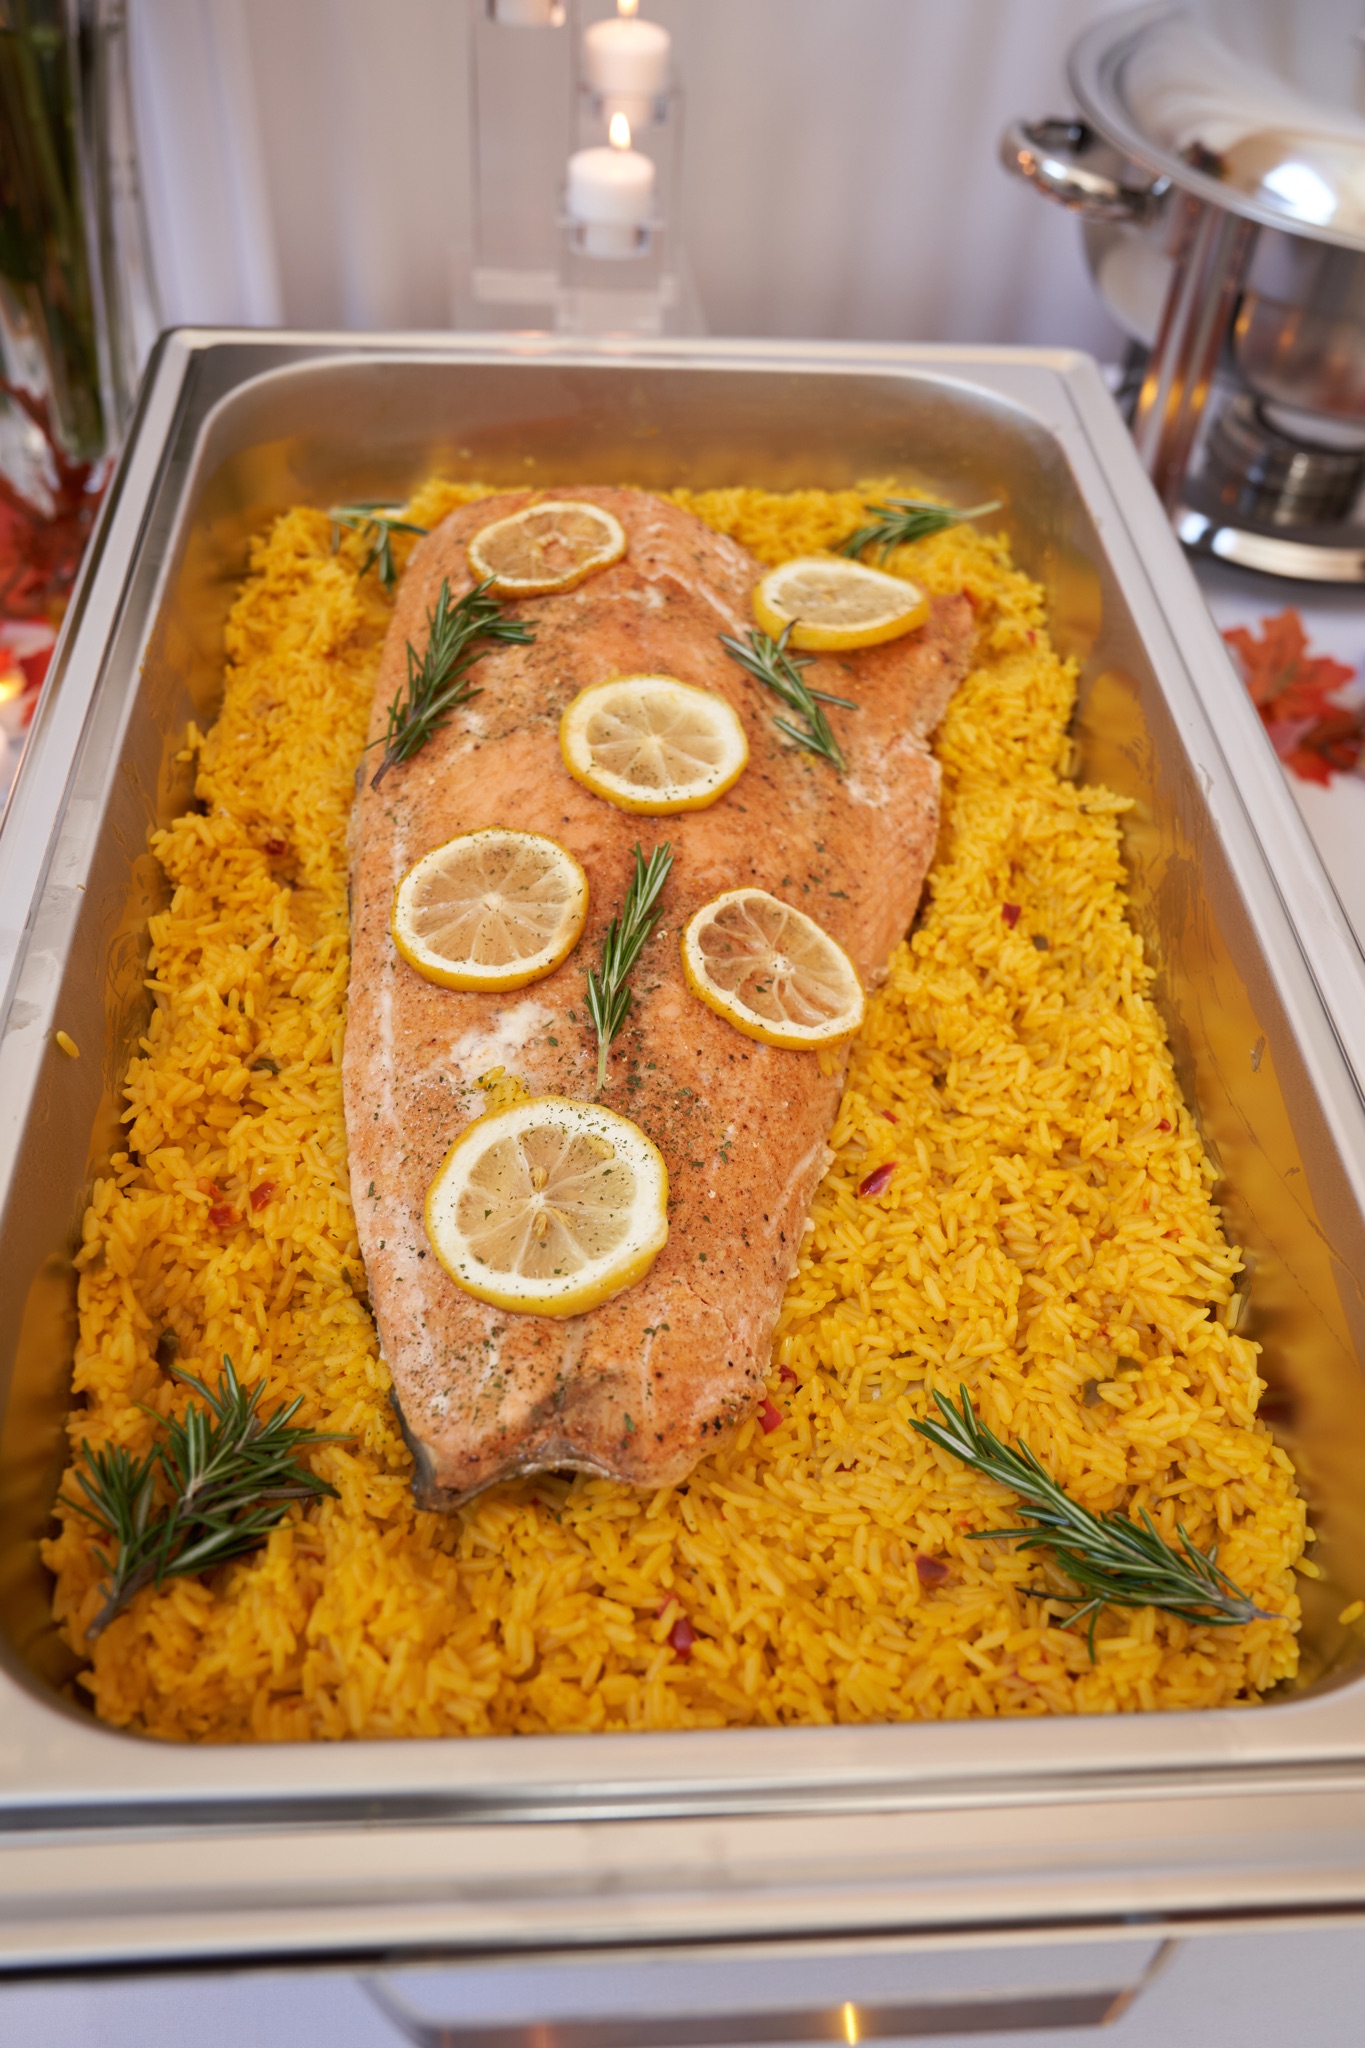 Baked Salmon baked on a bed of yellow rice